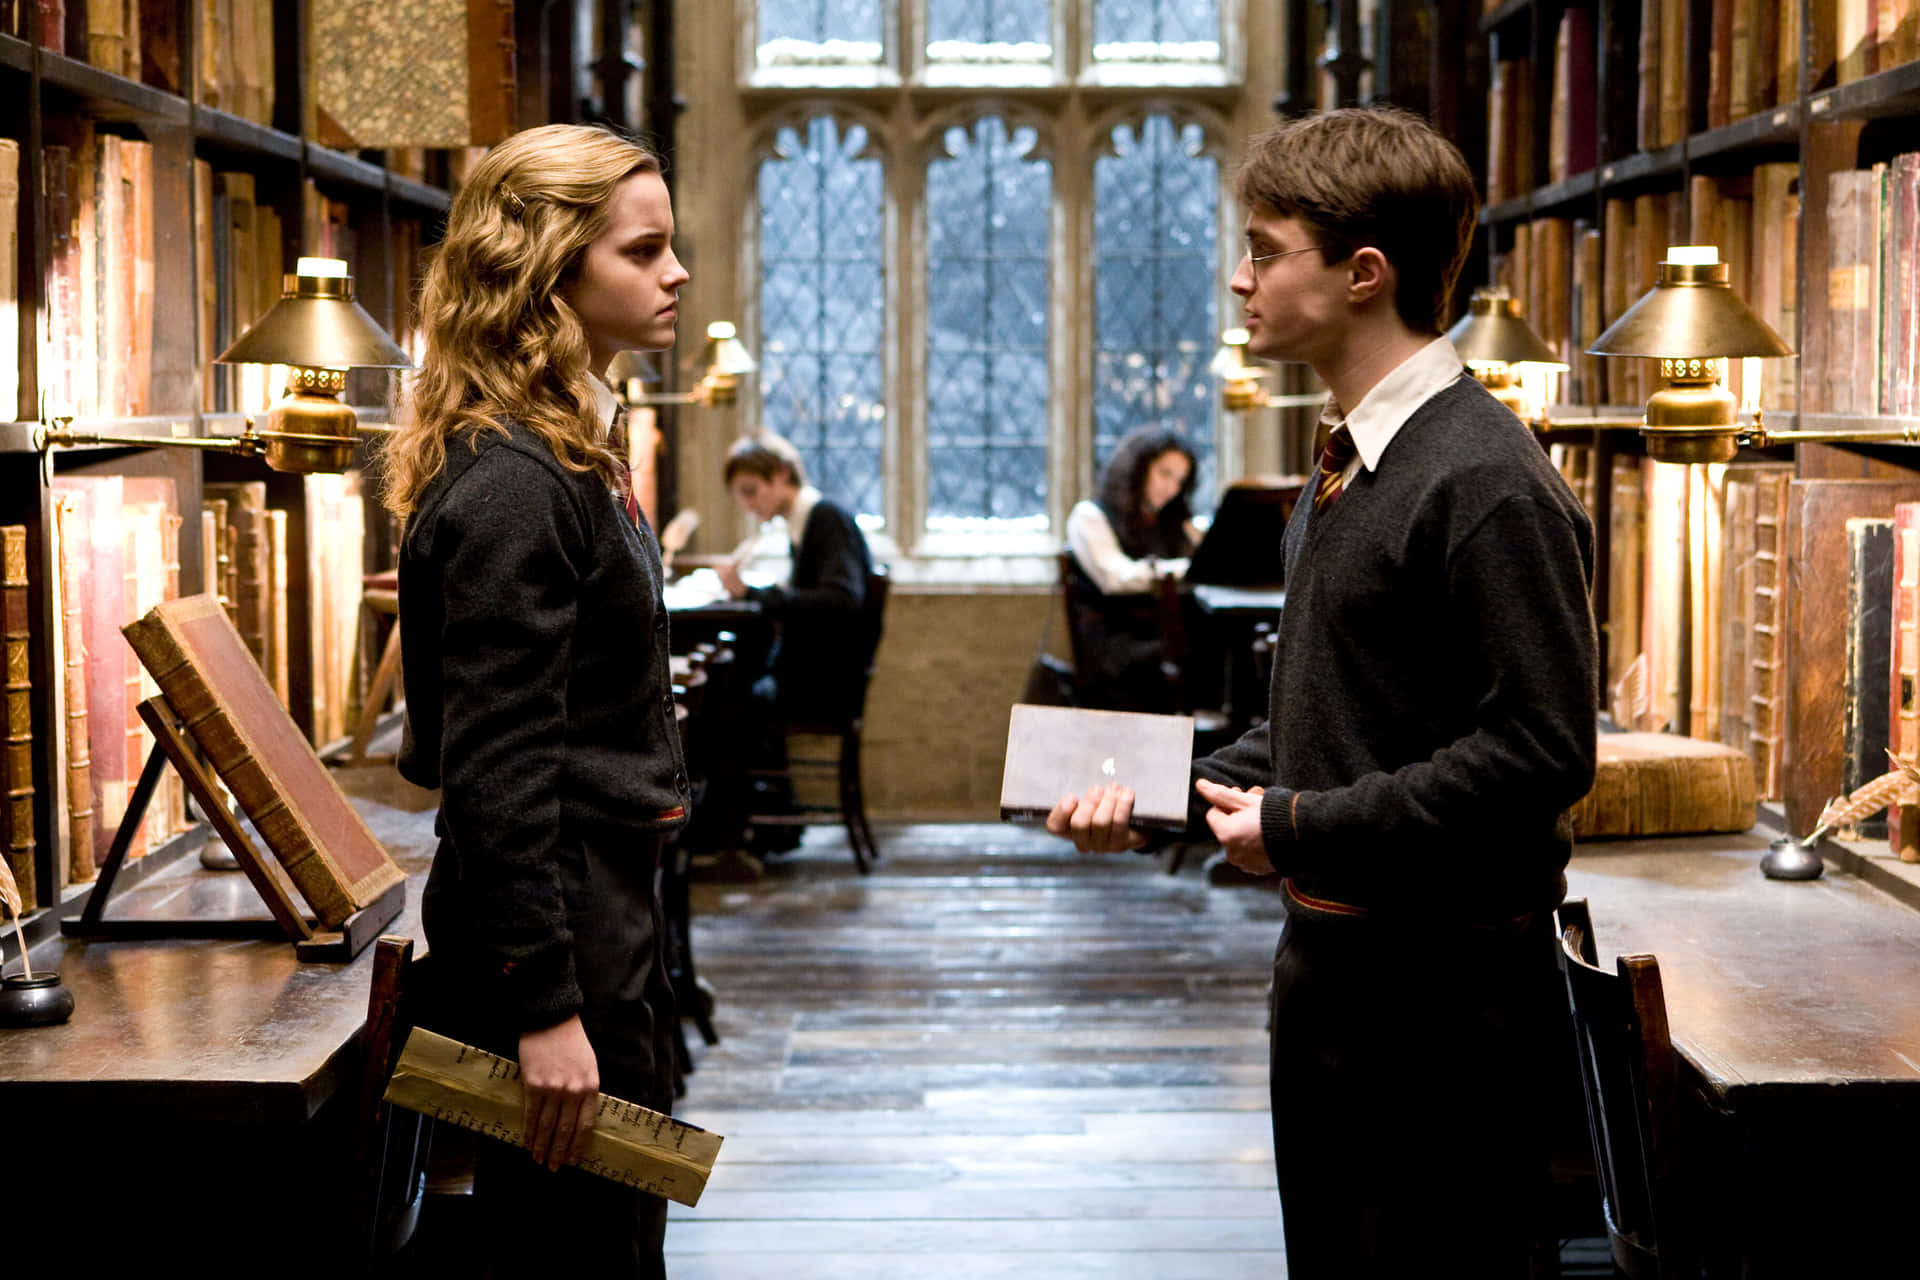 Step inside the famous library of Hogwarts, a magical world of knowledge for witches and wizards. Wallpaper